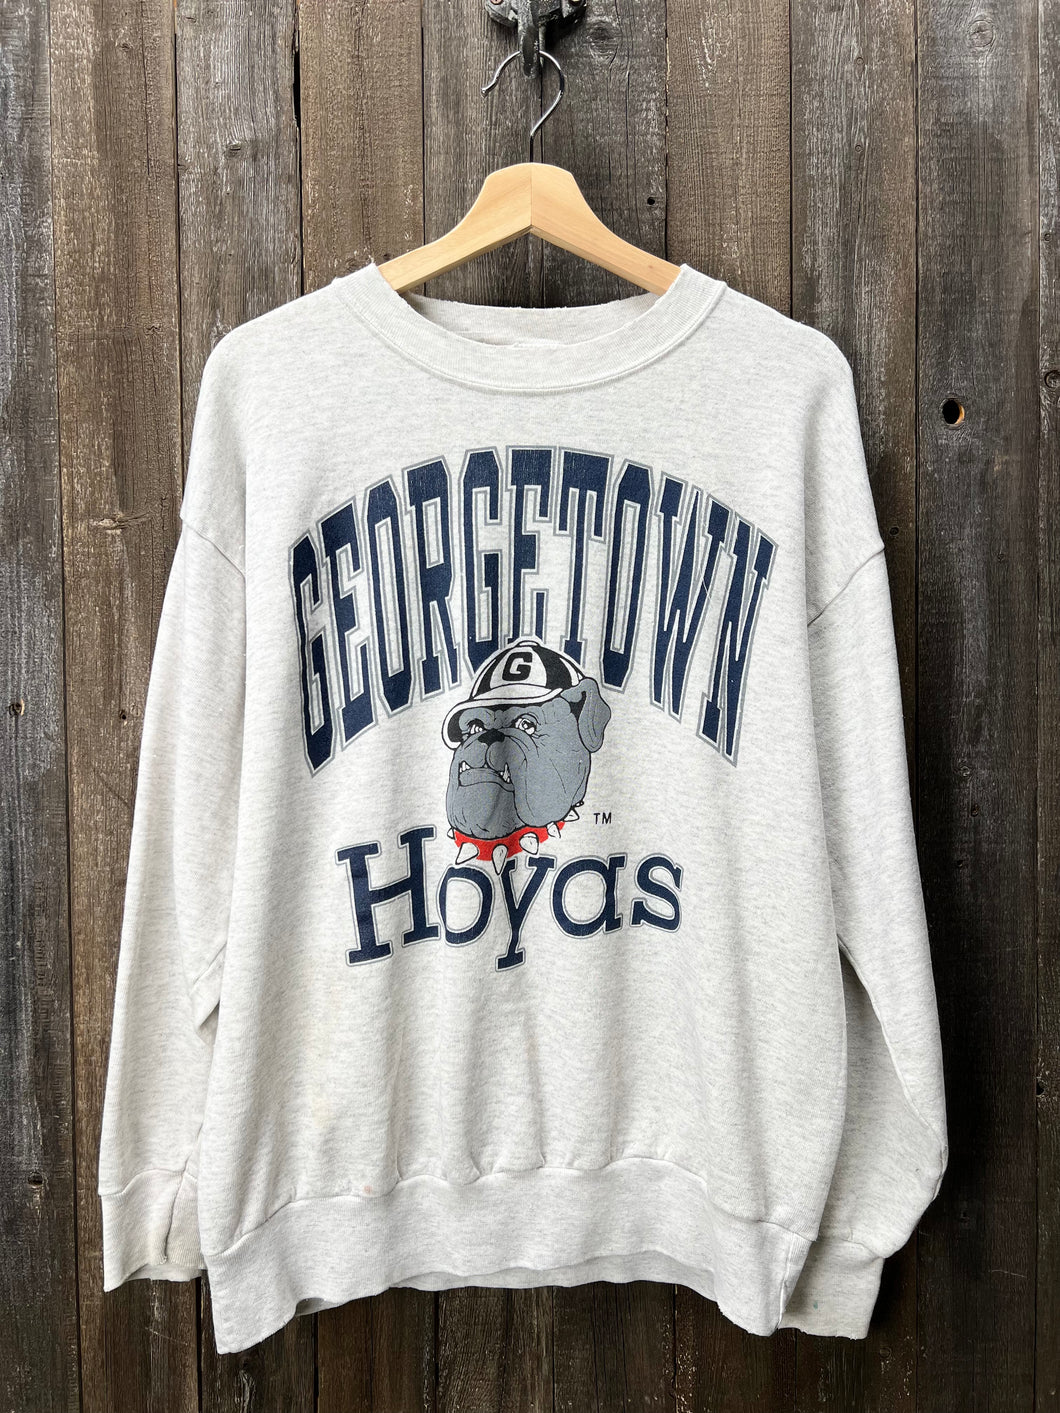 Georgetown Sweatshirt -M/L-Customize Your Embroidery Wording